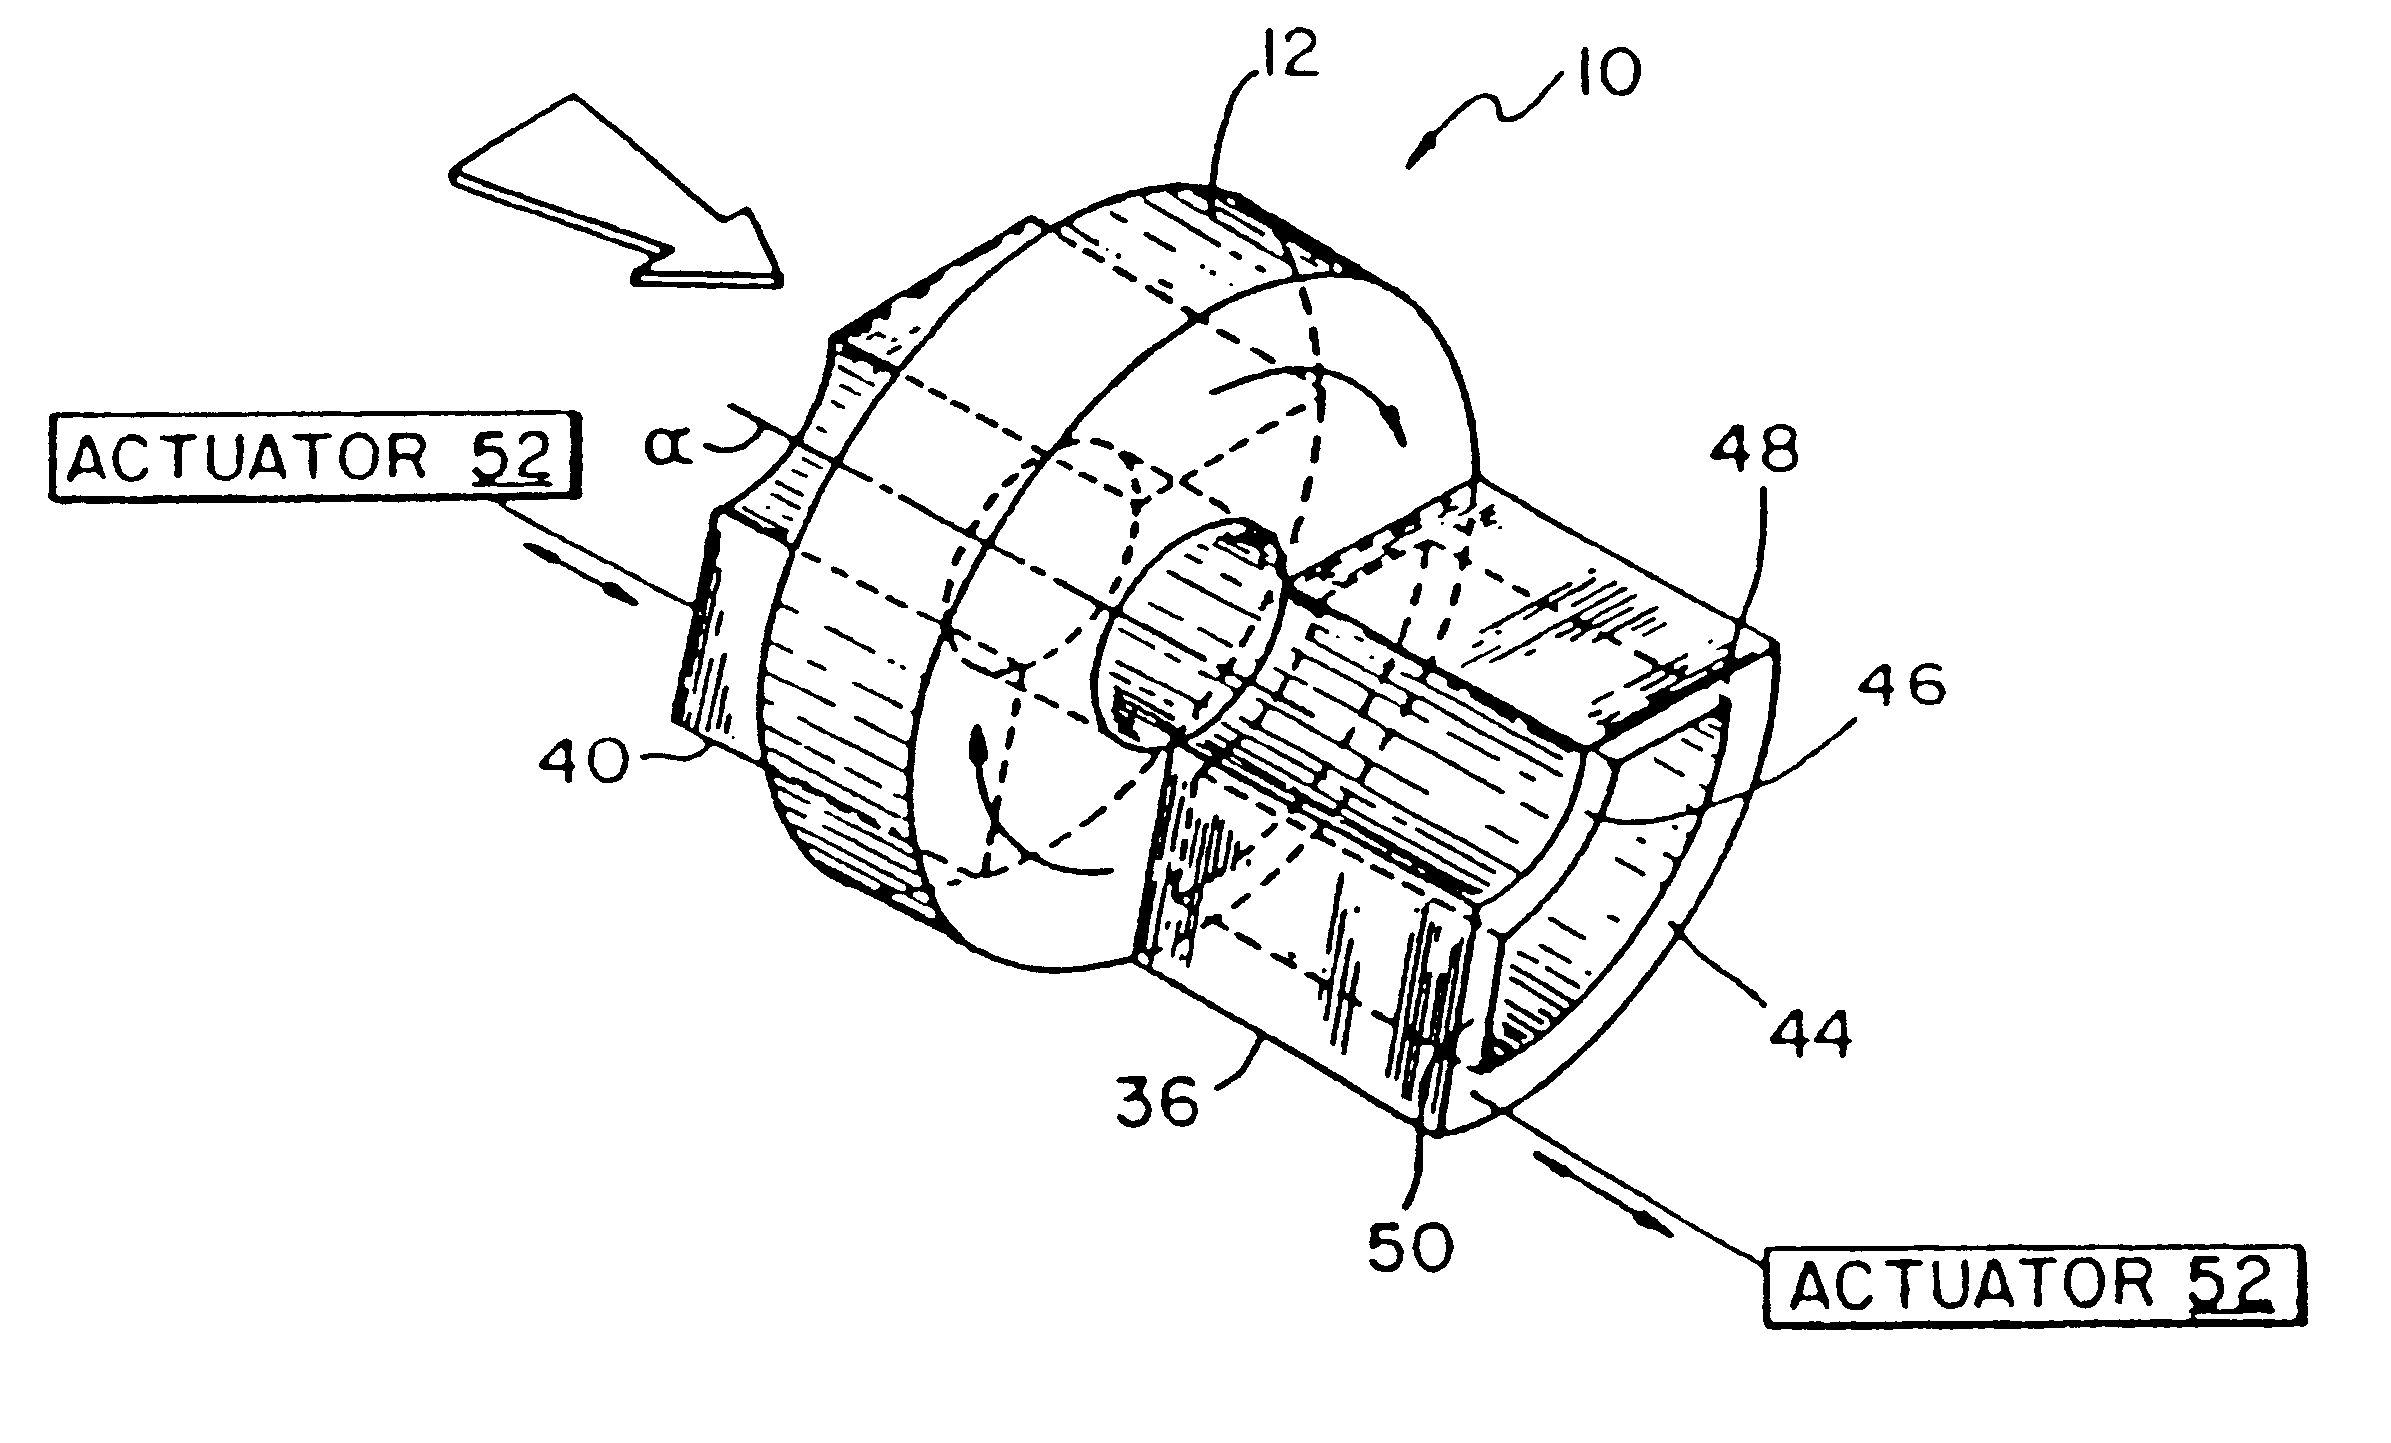 Heat exchanger containing a component capable of discontinuous movement